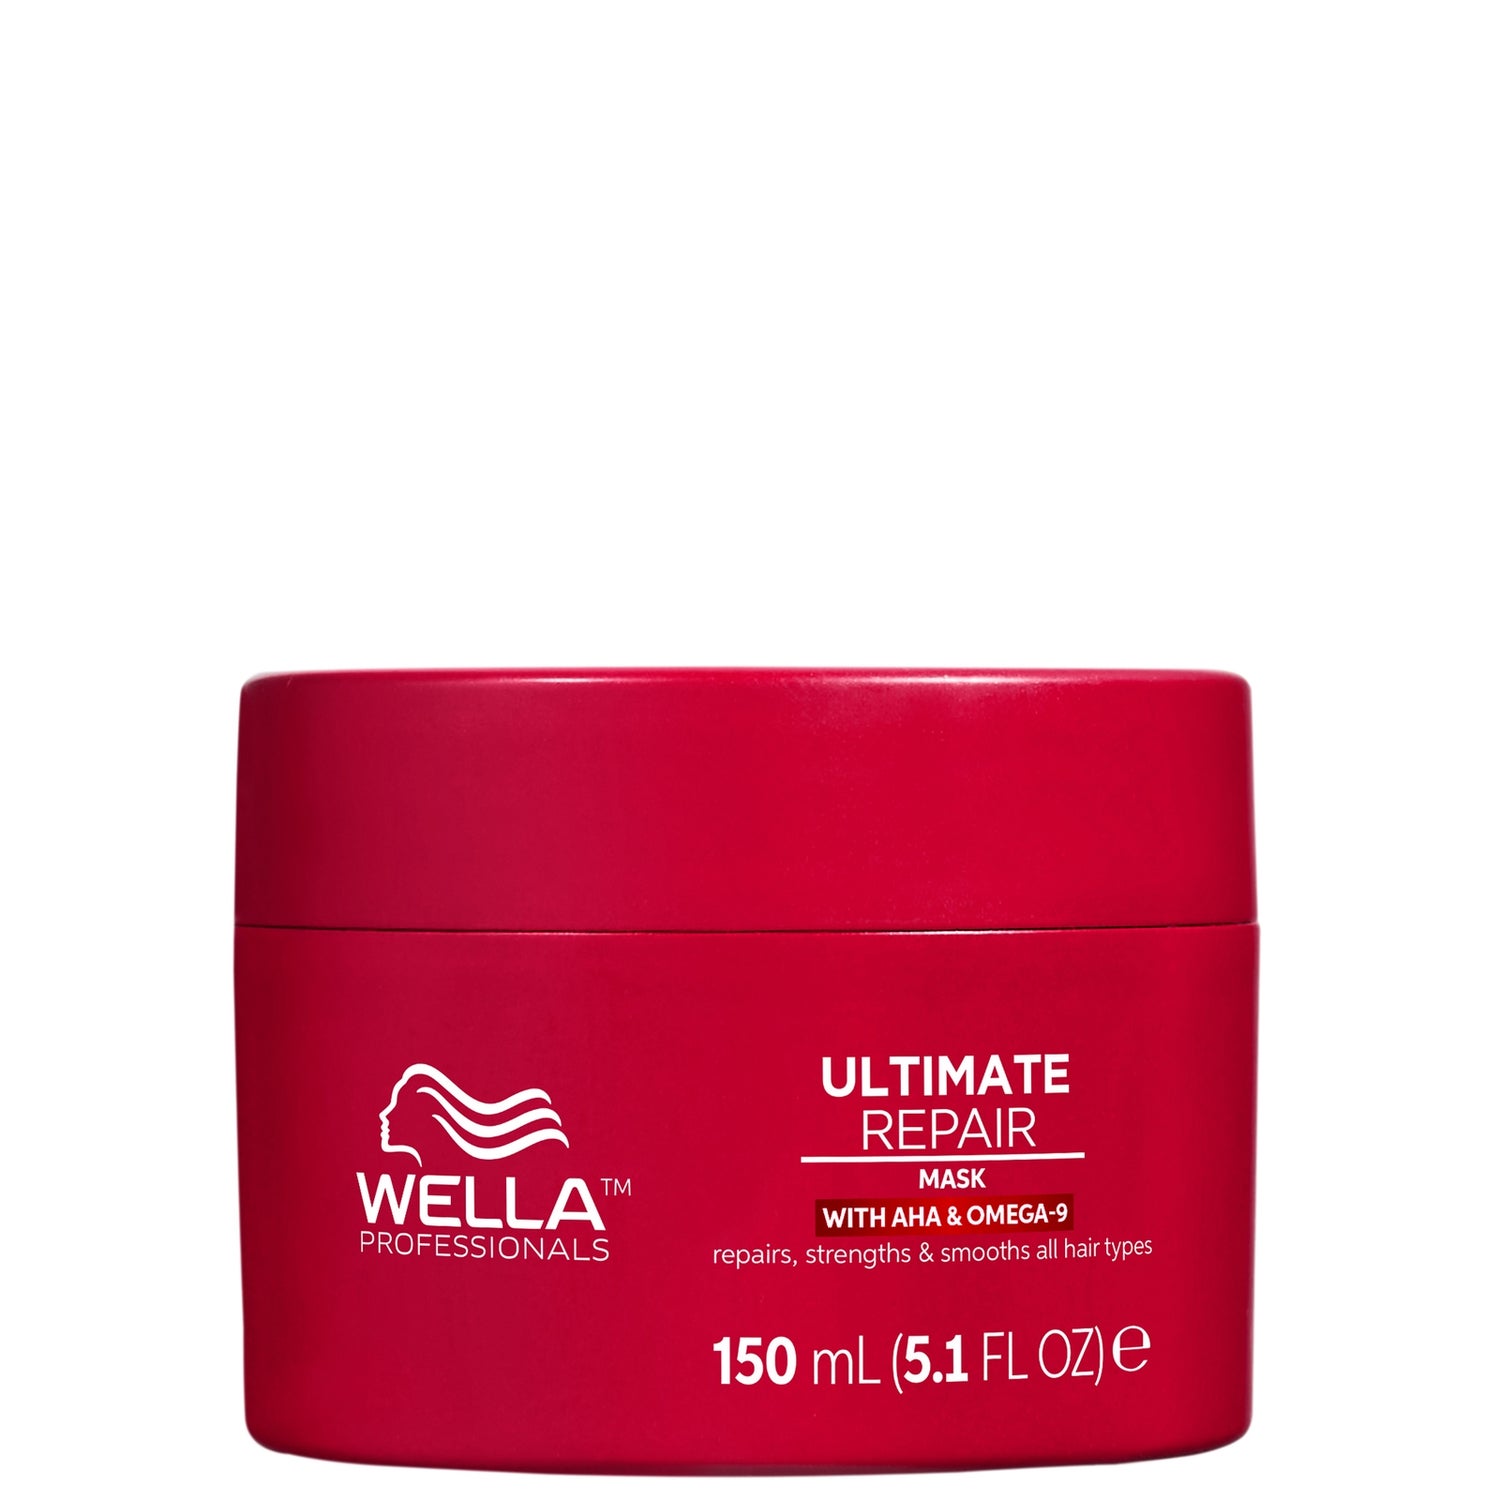 Wella Professionals Care Ultimate Repair Hair Mask for All Types of Hair Damage 150ml